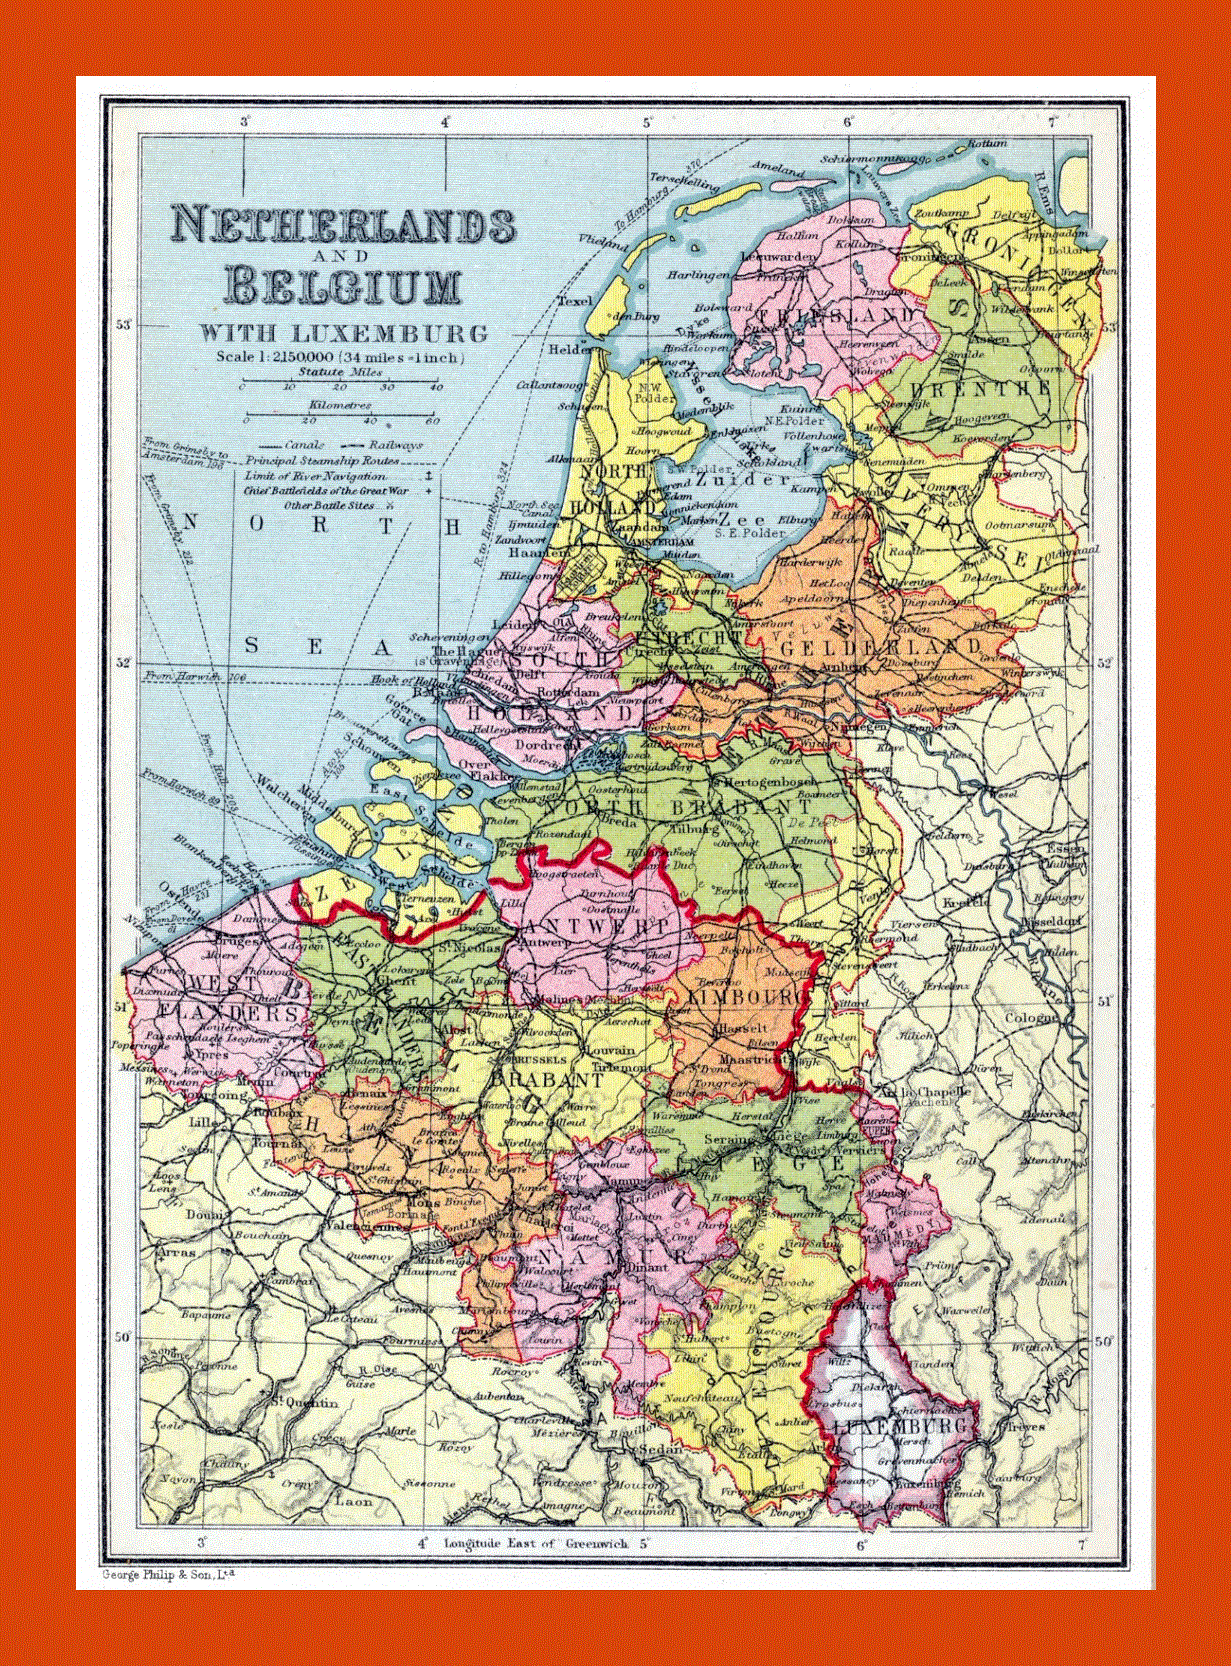 Old political and administrative map of Netherlands and Belgium